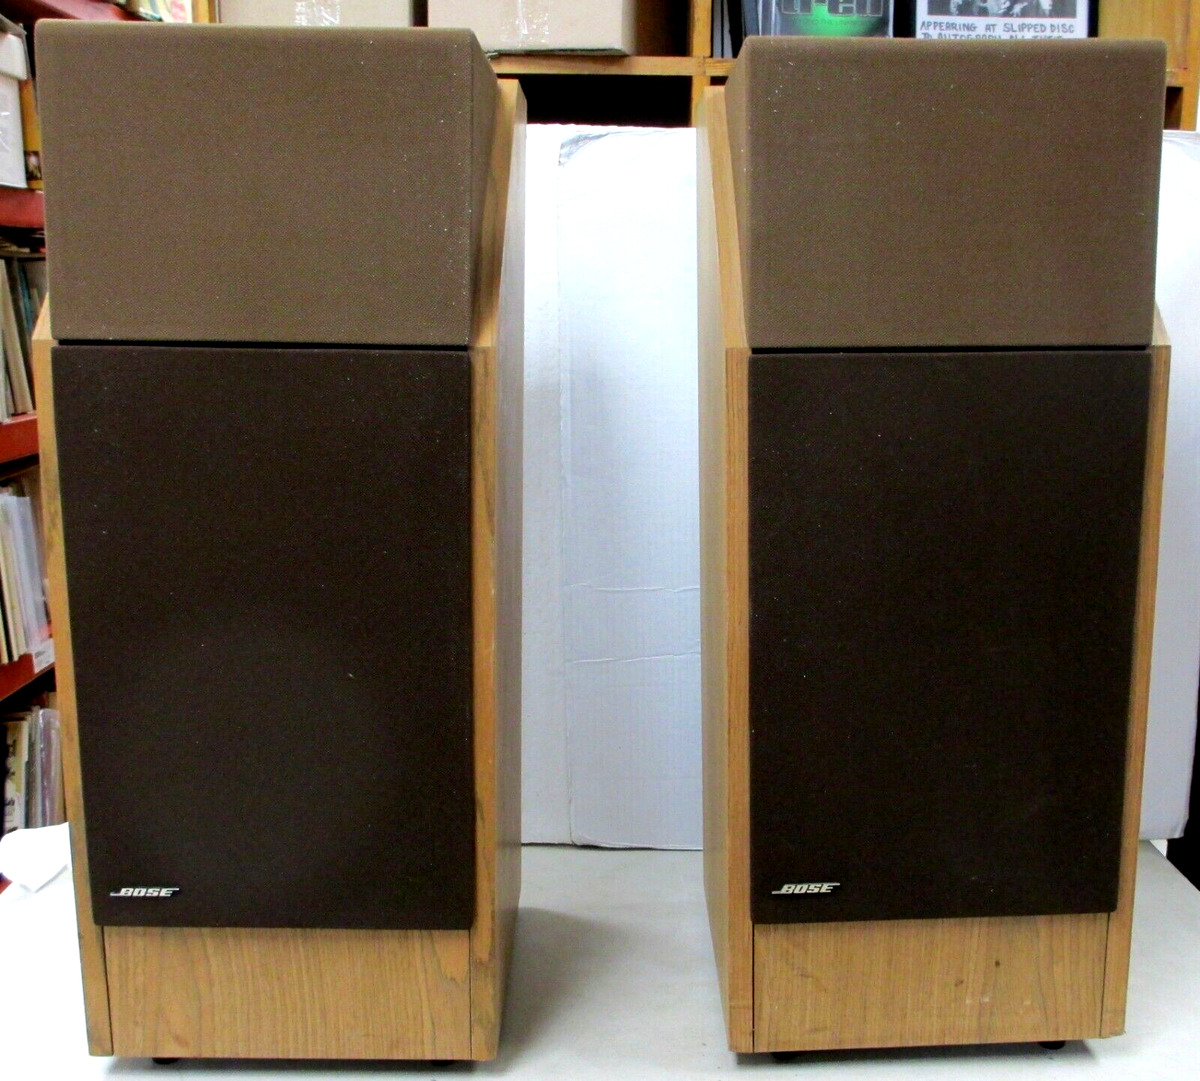 BOSE 601 Series III Direct/Reflecting with 2 replacement speakers | eBay